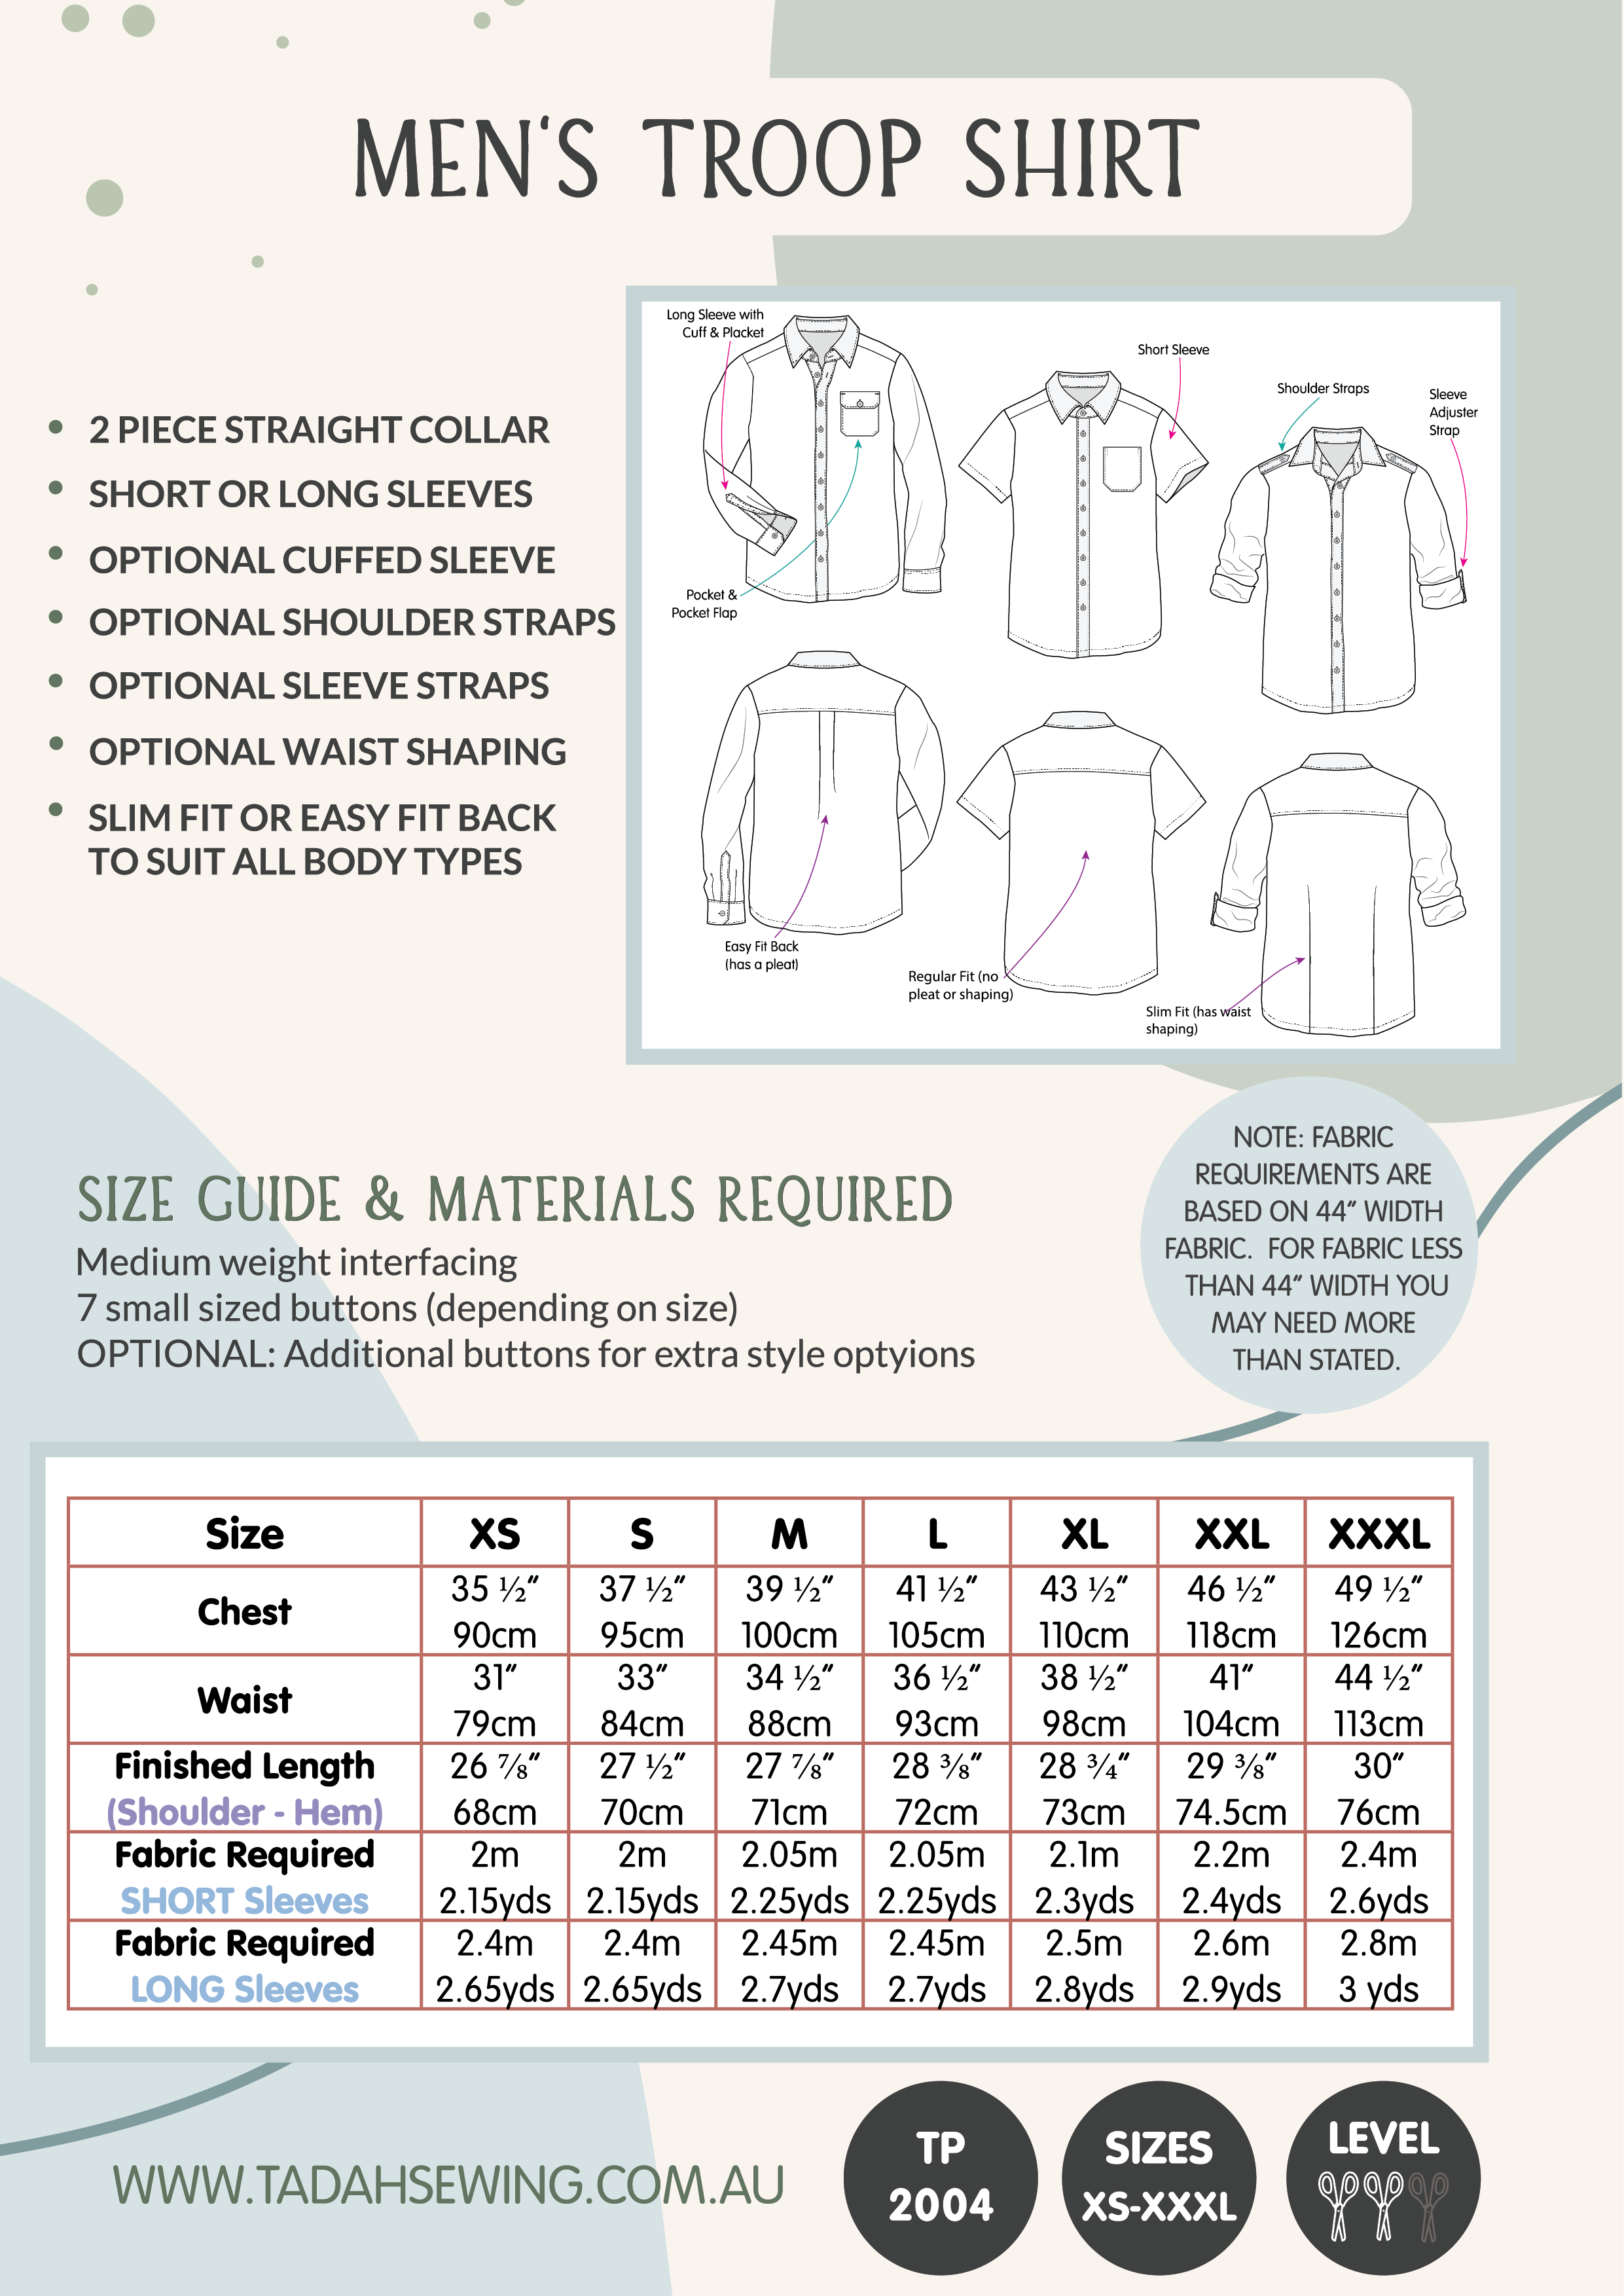 templates for sewing patterns